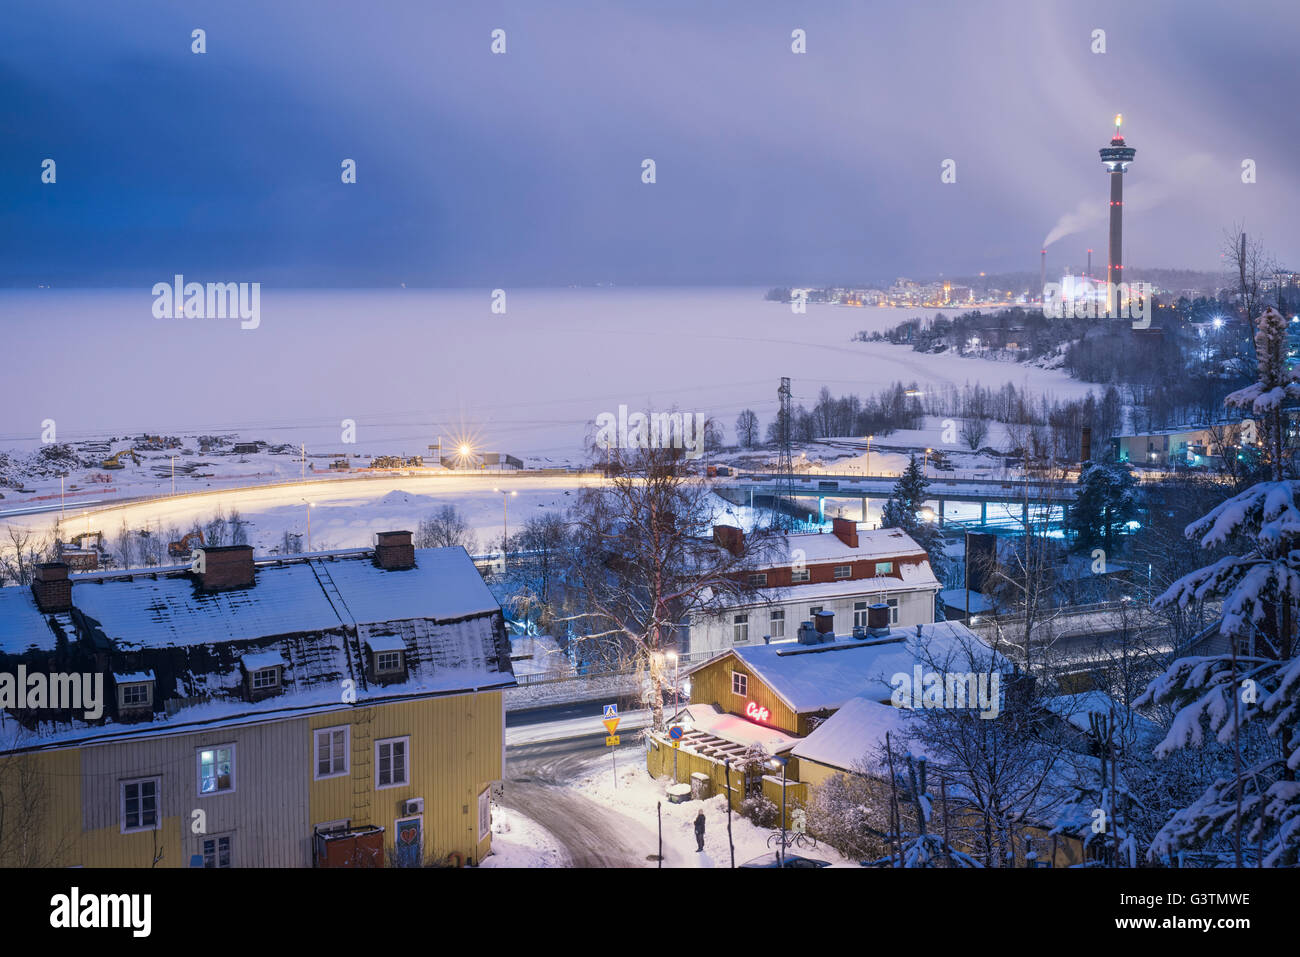 Finland, Pirkanmaa, Tampere, Nasijarvi, Illuminated cityscape with frozen lake in background Stock Photo